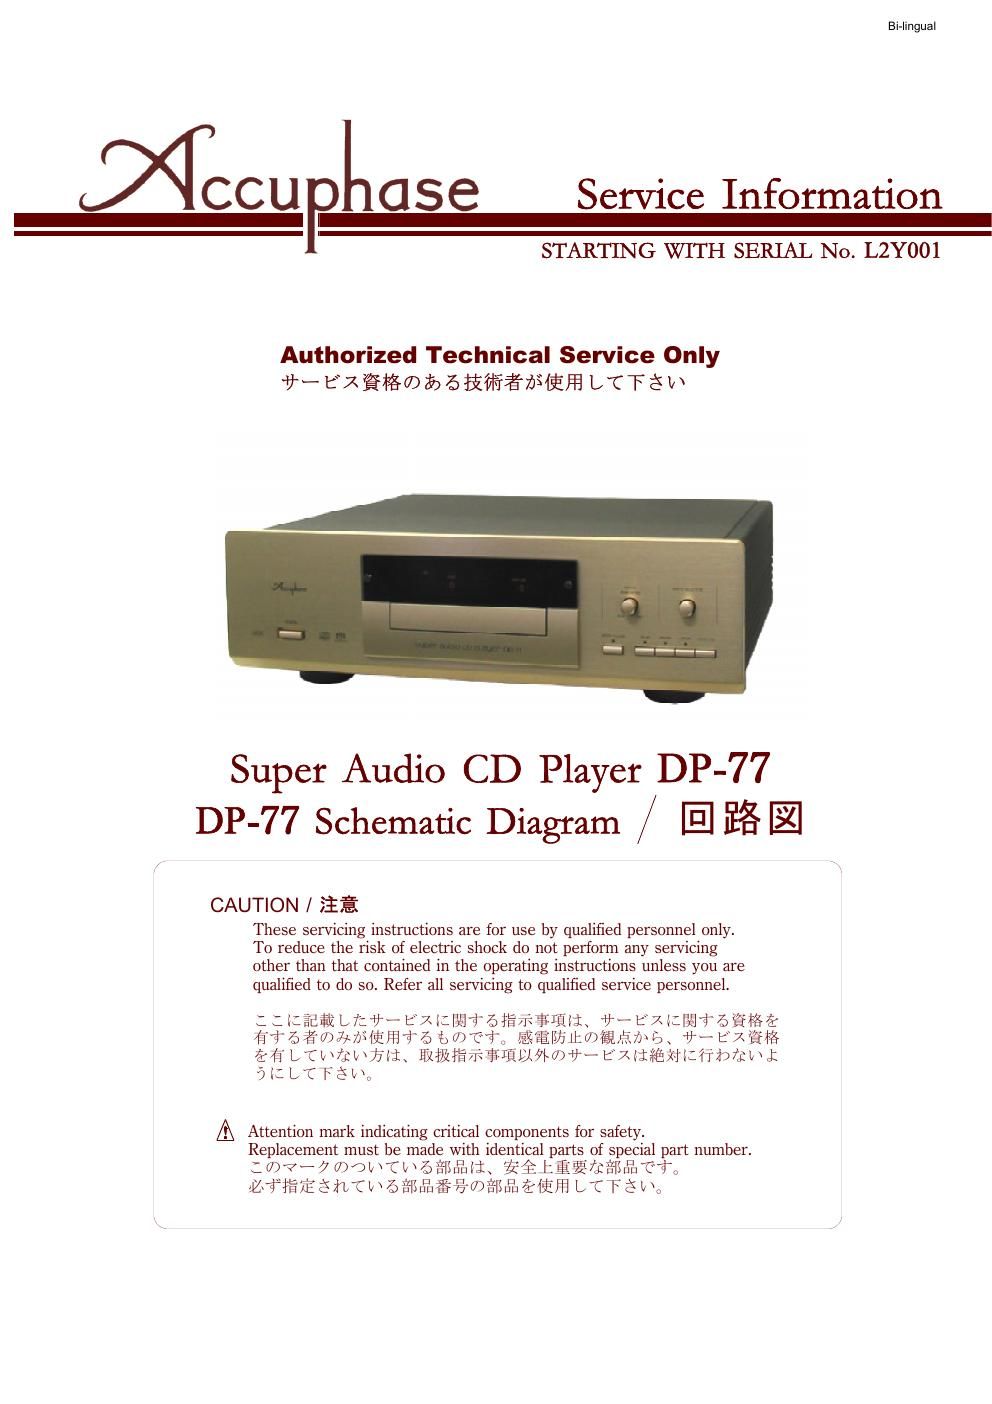 Accuphase DP77 sacd servicemanual